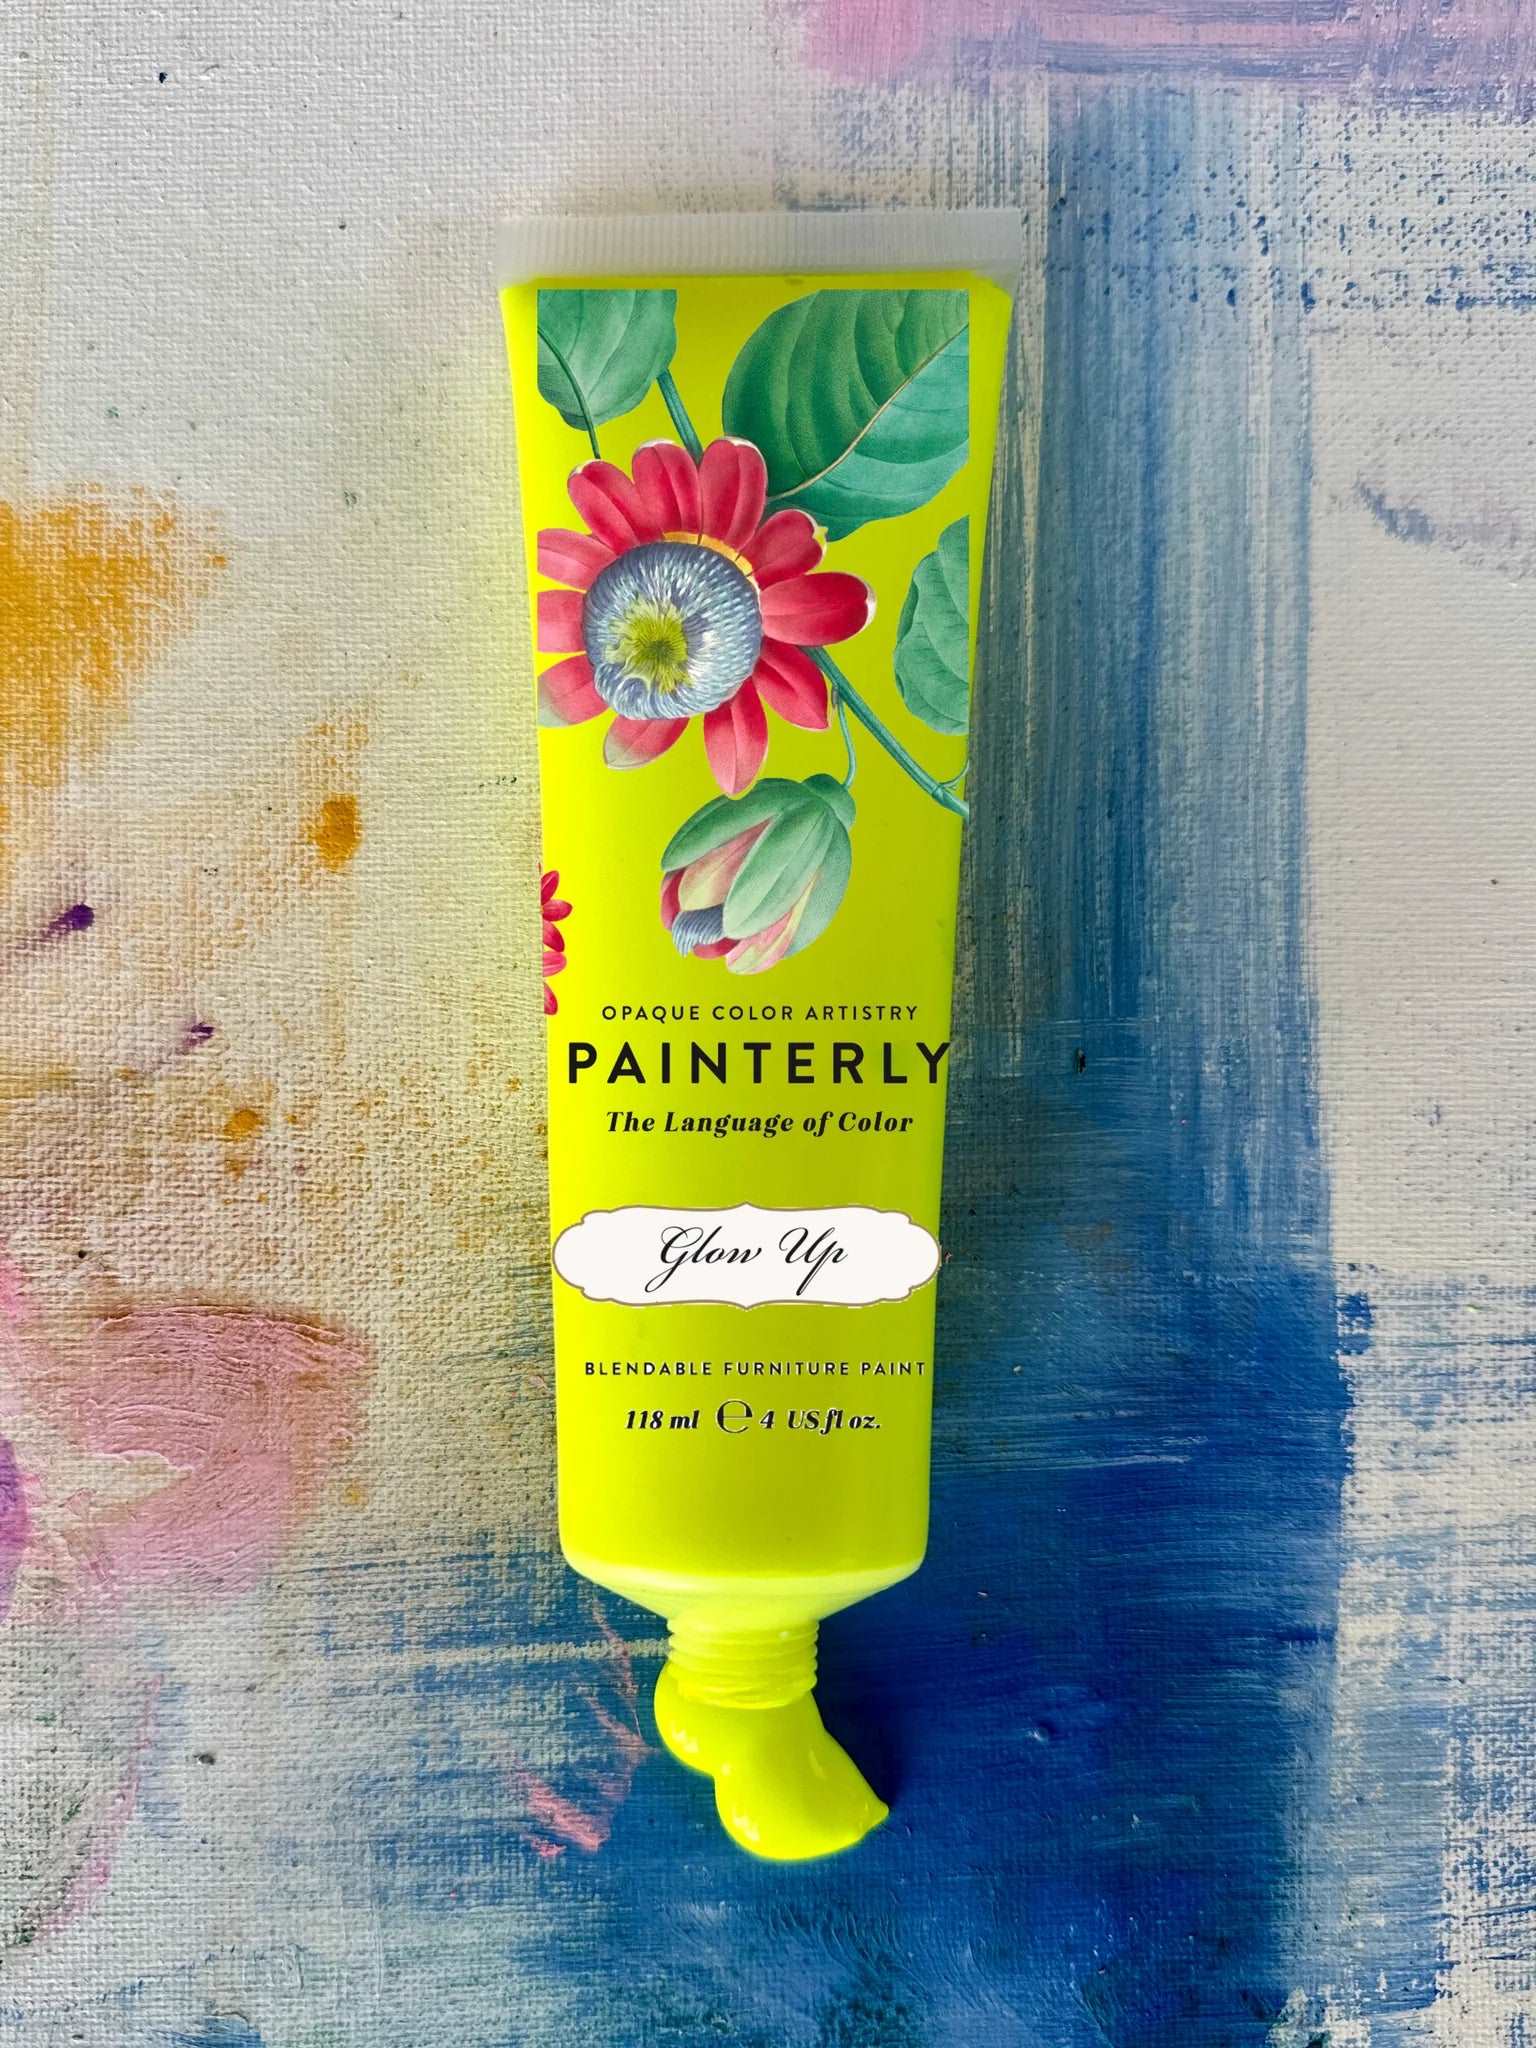 Glow Up Painterly Furniture Artist Paint by DIY Paint